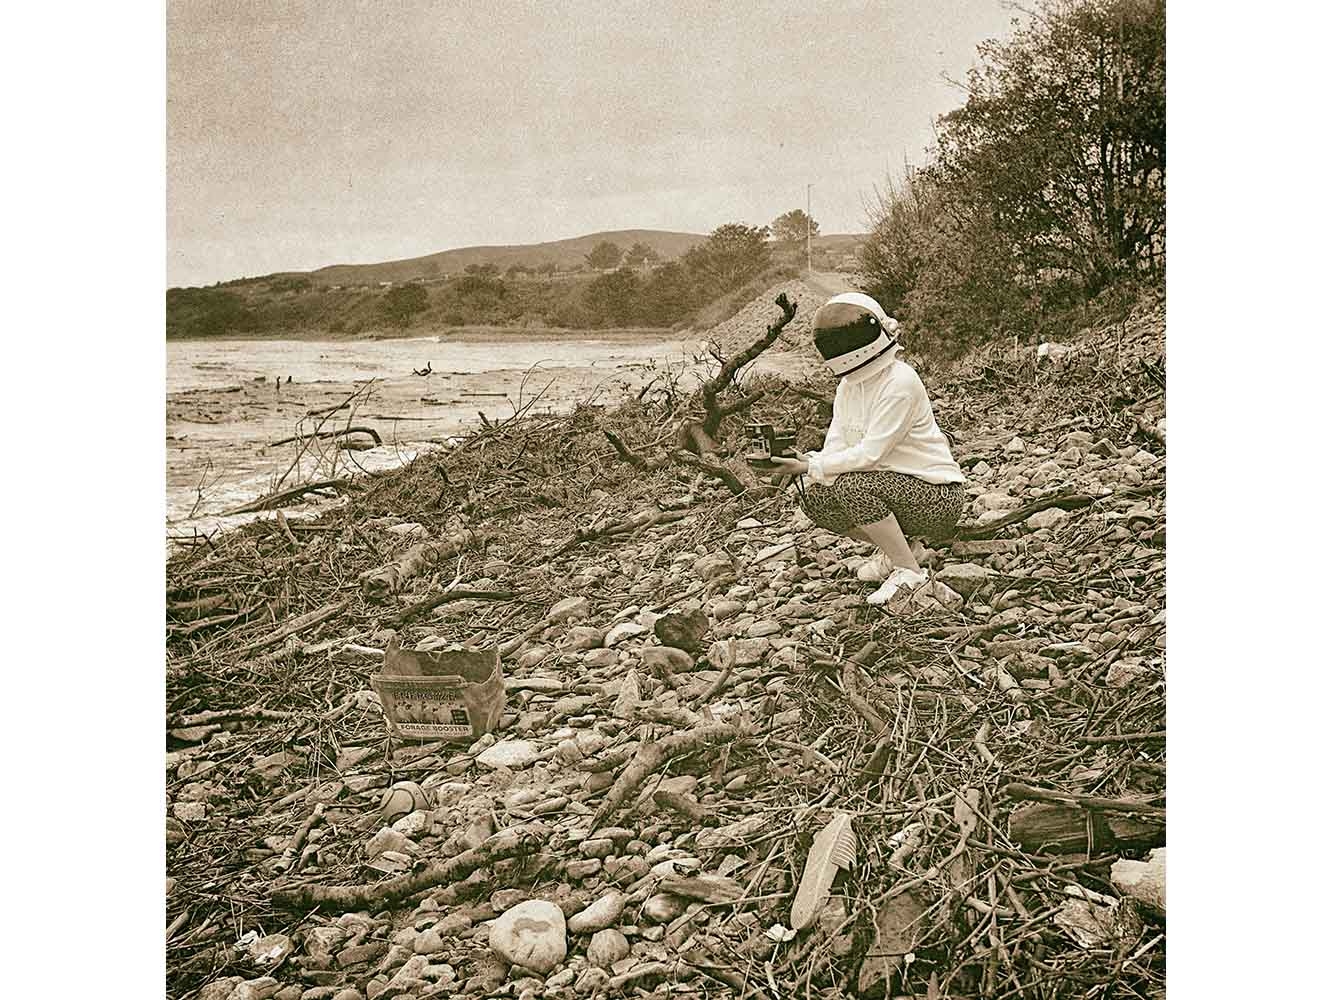 Black and white photograph of person in space helmet on a beach looking at discarded rubbish